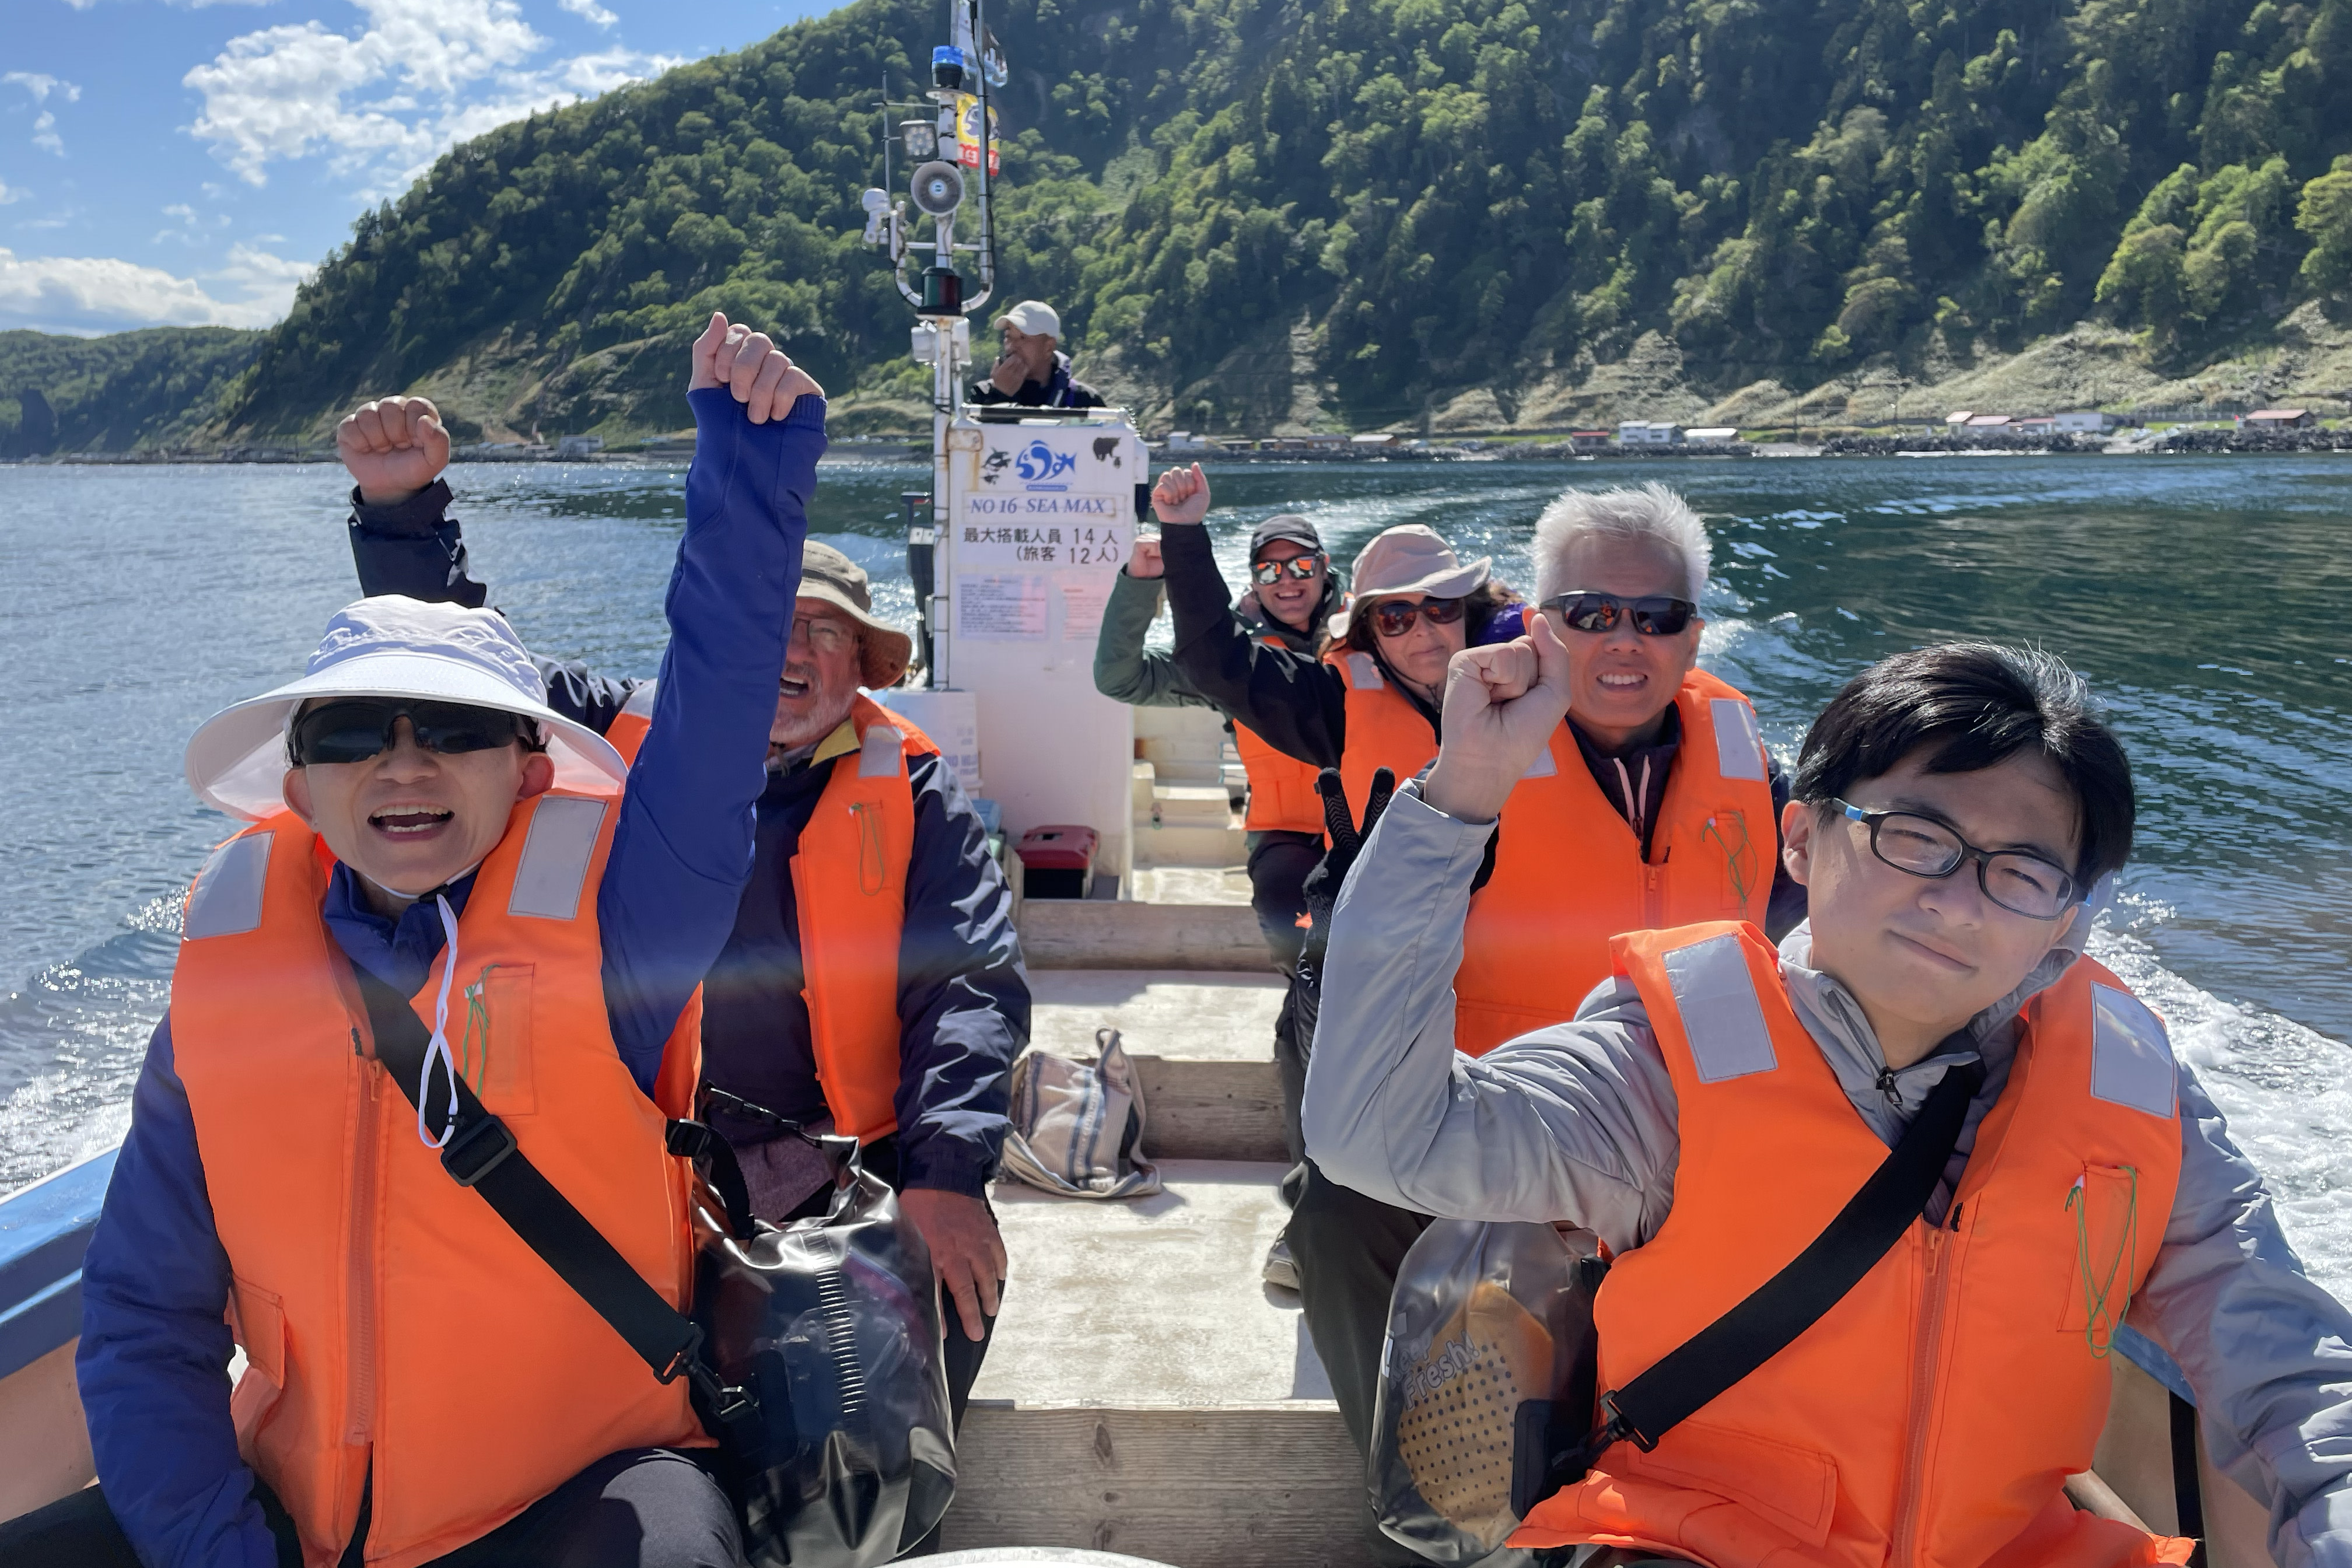 A group of tourists pump their fists aboard a small boat off the Shiretoko coast